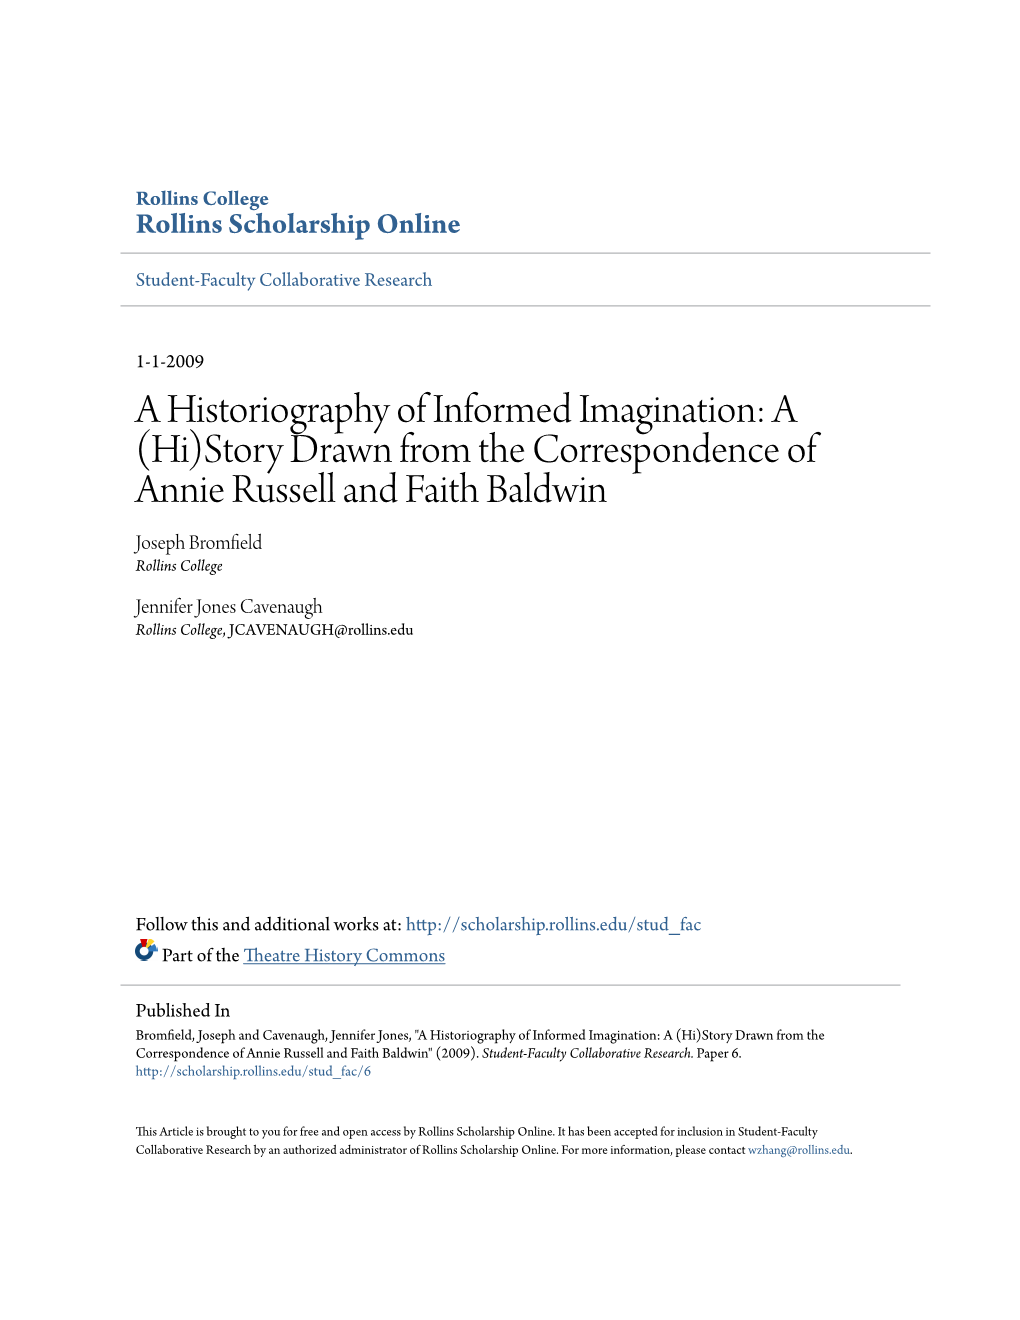 A Historiography of Informed Imagination: a (Hi)Story Drawn from the Correspondence of Annie Russell and Faith Baldwin Joseph Bromfield Rollins College